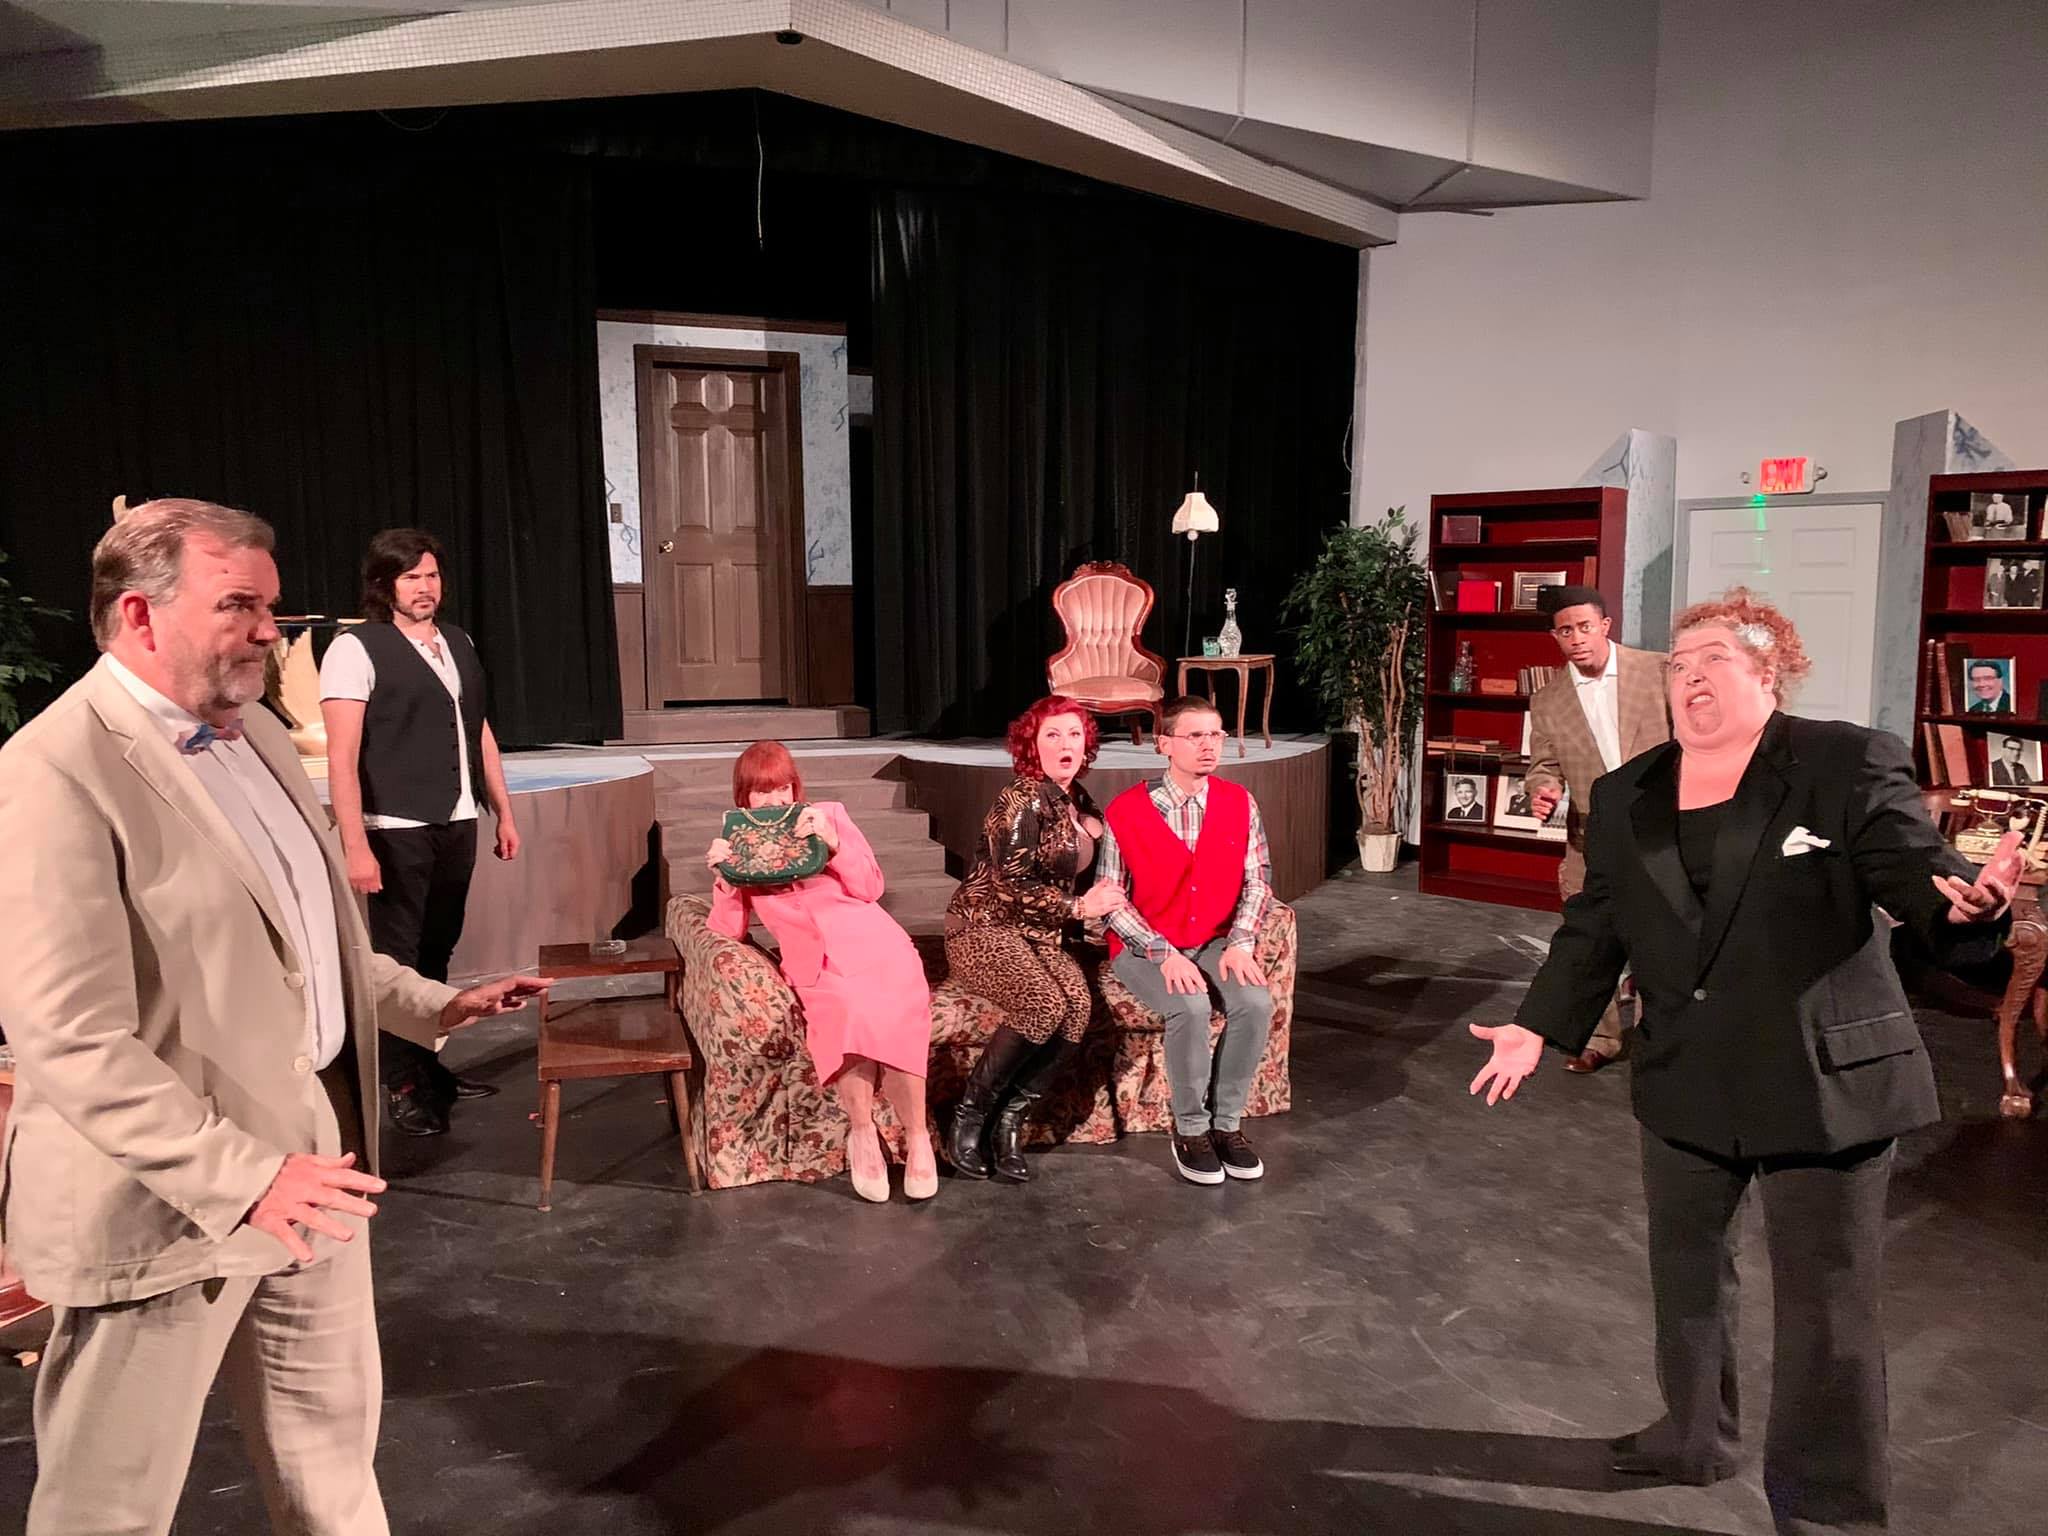 The cast of the current Jewel Box Theatre production of The Vultures by Mark A. Ridge. The show is running until June 20, 2021